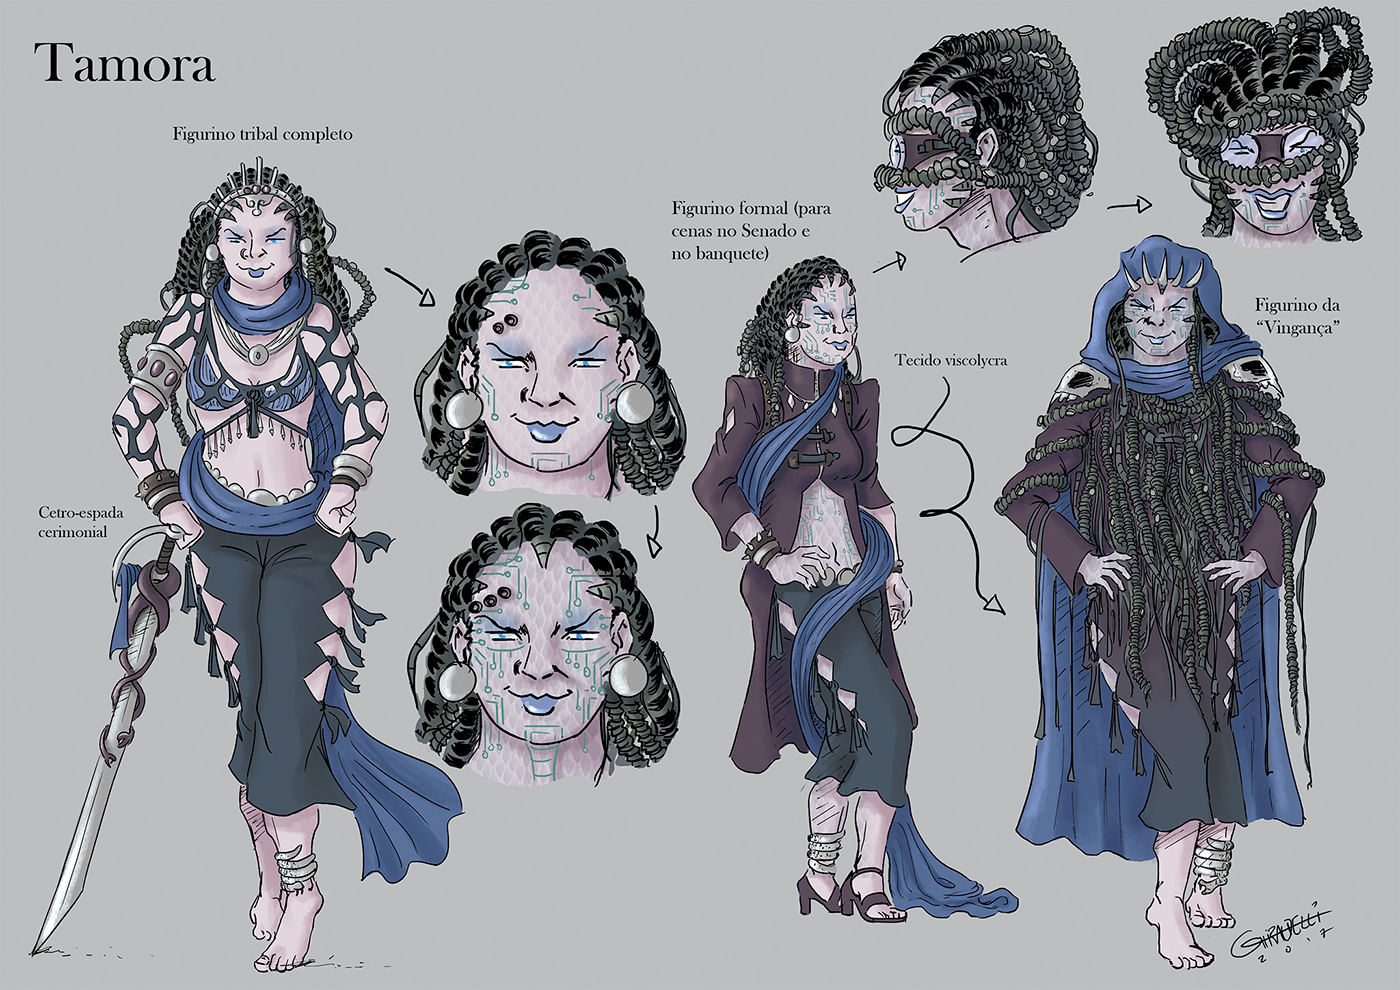 shakespeare Titus Andronicus Ancient Rome STEAMPUNK character redesign Model Sheet digital illustration